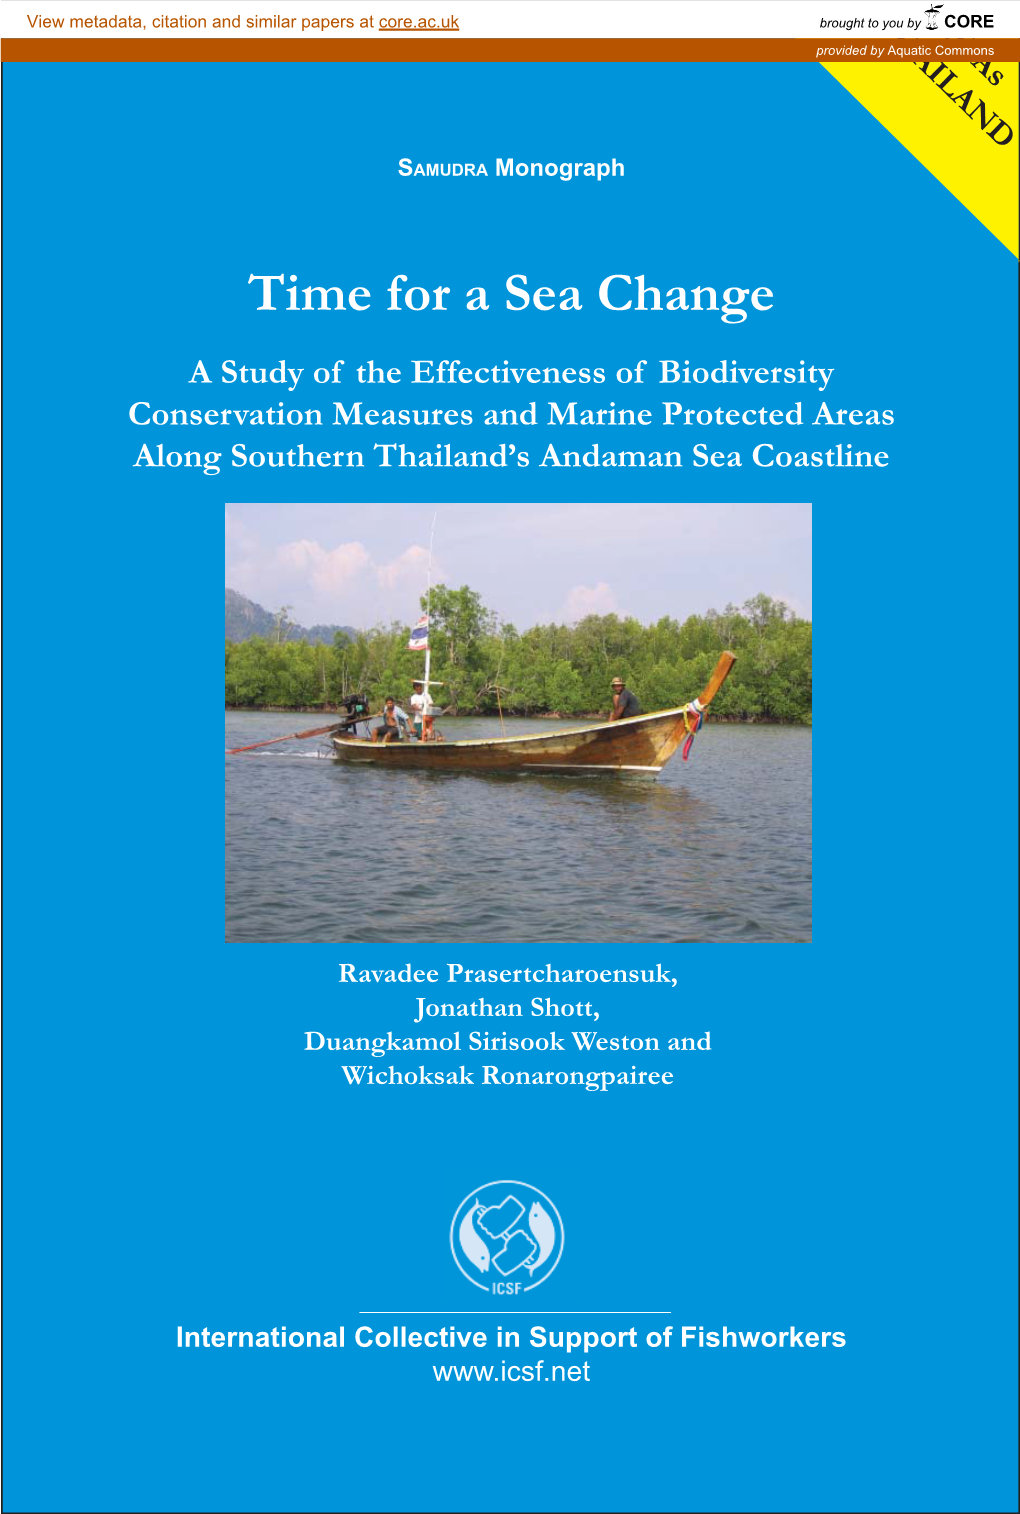 Time for a Sea Change a Study of the Effectiveness of Biodiversity Conservation Measures and Marine Protected Areas Along Southern Thailand’S Andaman Sea Coastline